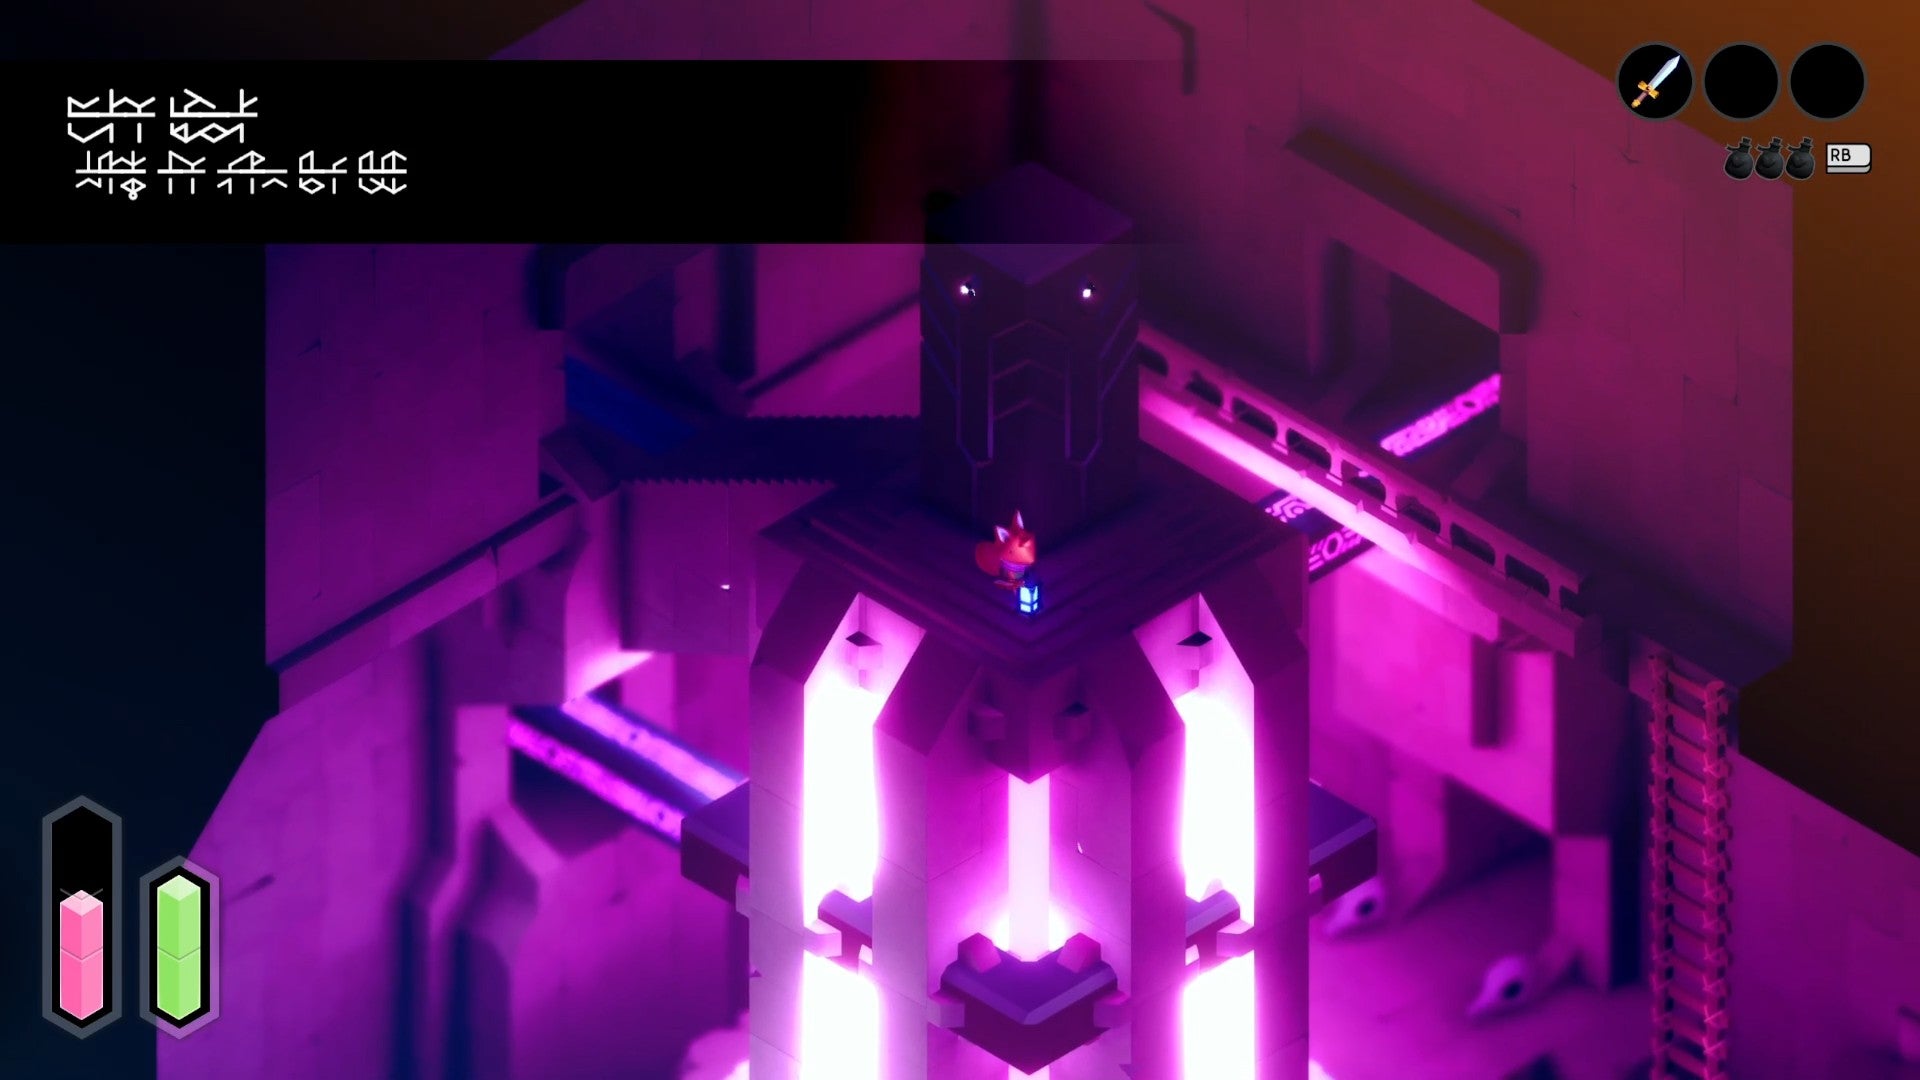 Tunic fox leaning down to grab a lantern next to a stone pillar. The room is illuminated with a bright purple light